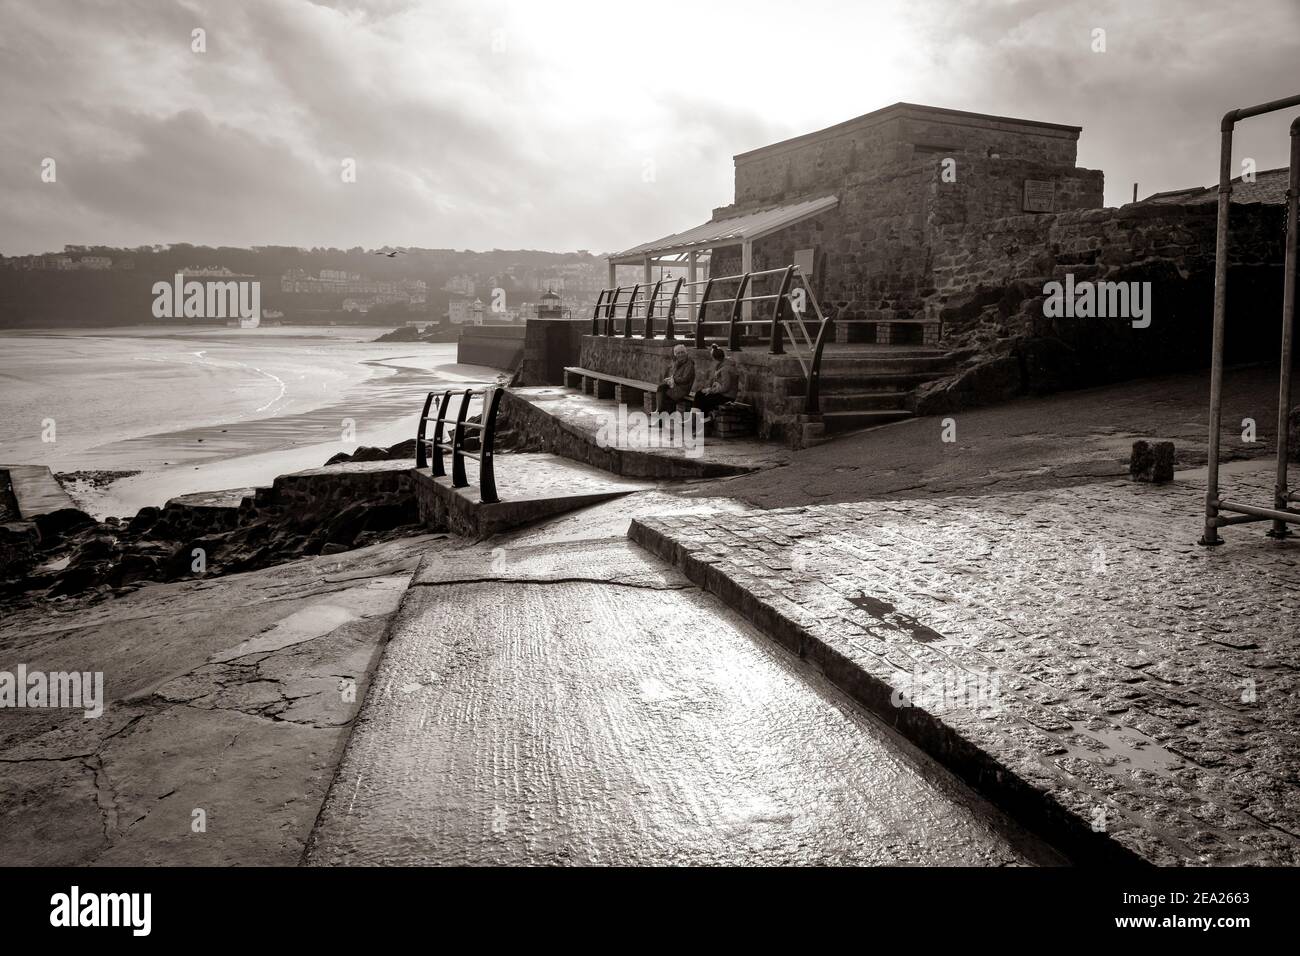 Desolation of St Ives, Cornwall - empty when usually a sea of tourists thanks to the Covid 19 global pandemic lockdown restricting travel and tourists Stock Photo